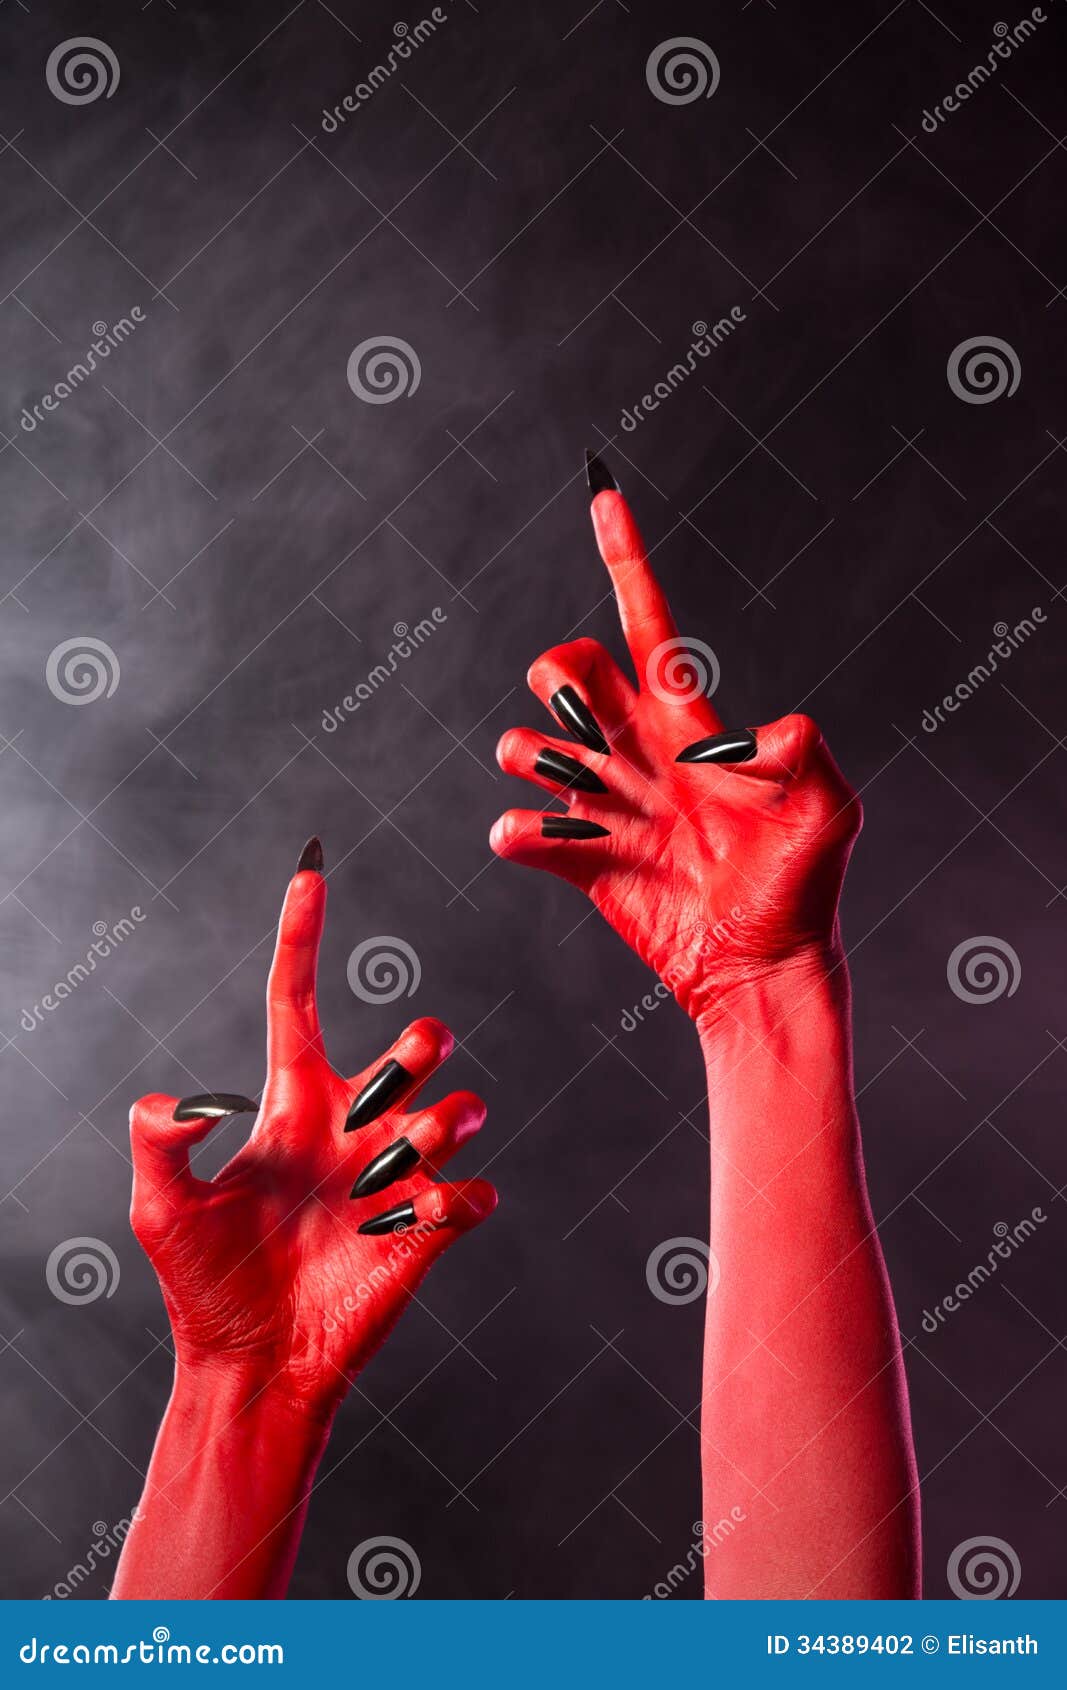 Creepy Red Devil Hands With Black Nails Stock Photography ...